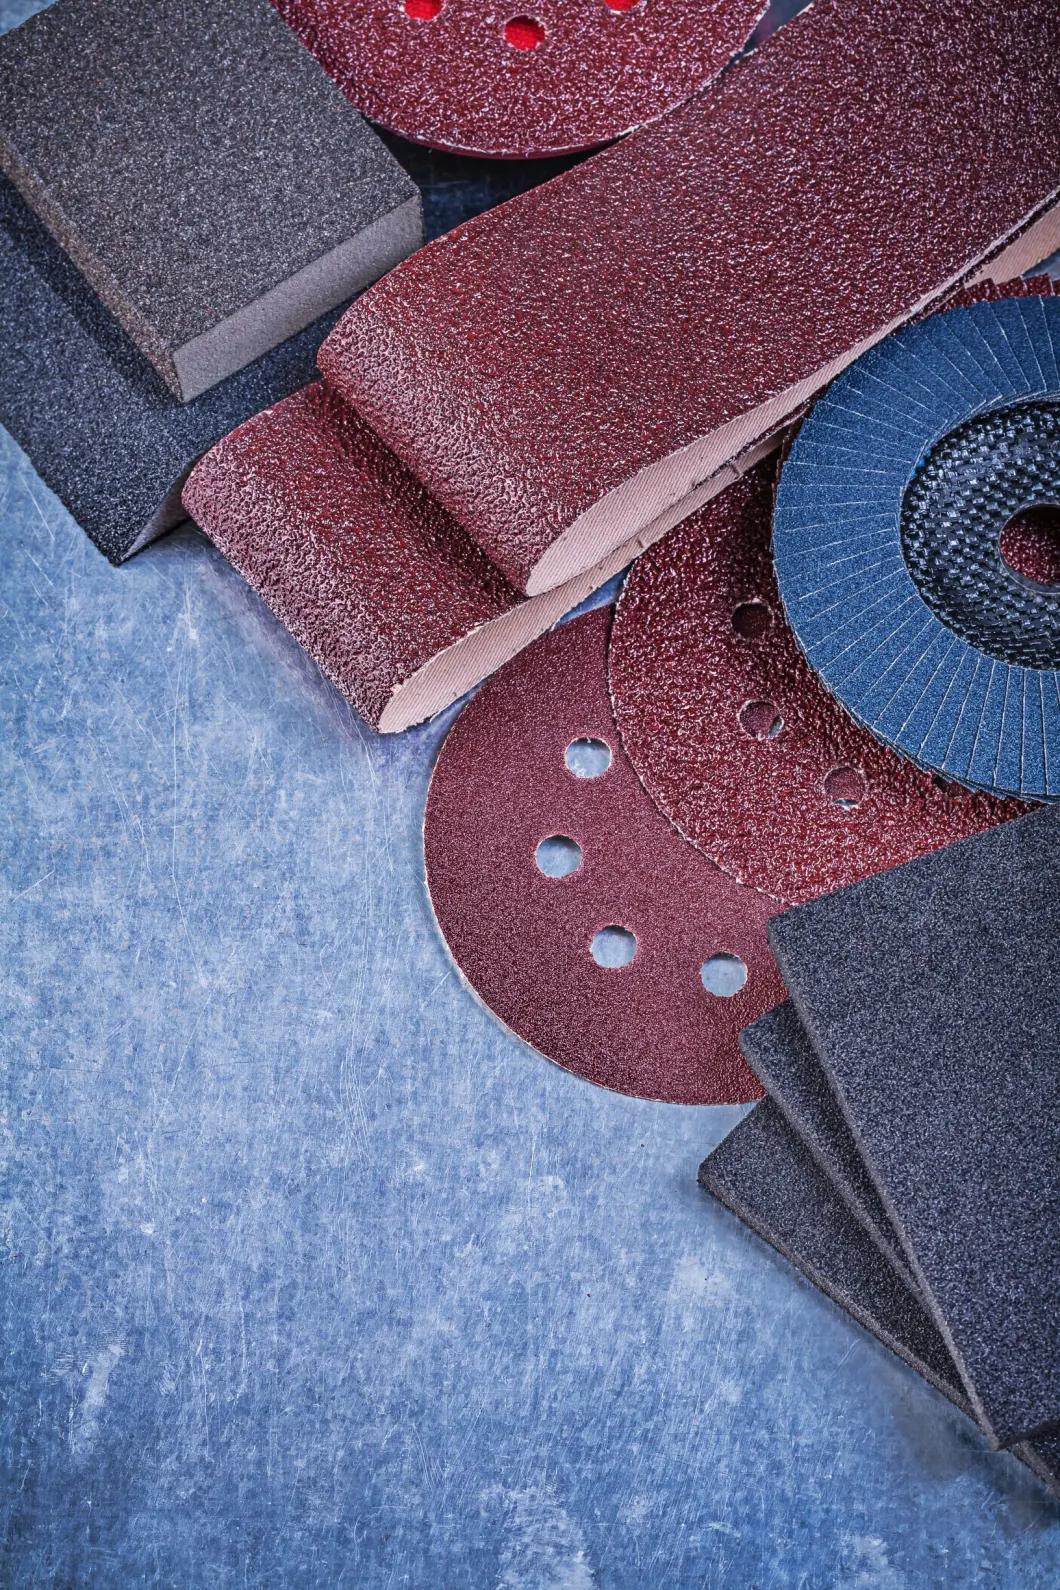 Y-Wt Cloth Coated Abrasives with Silicon Carbide